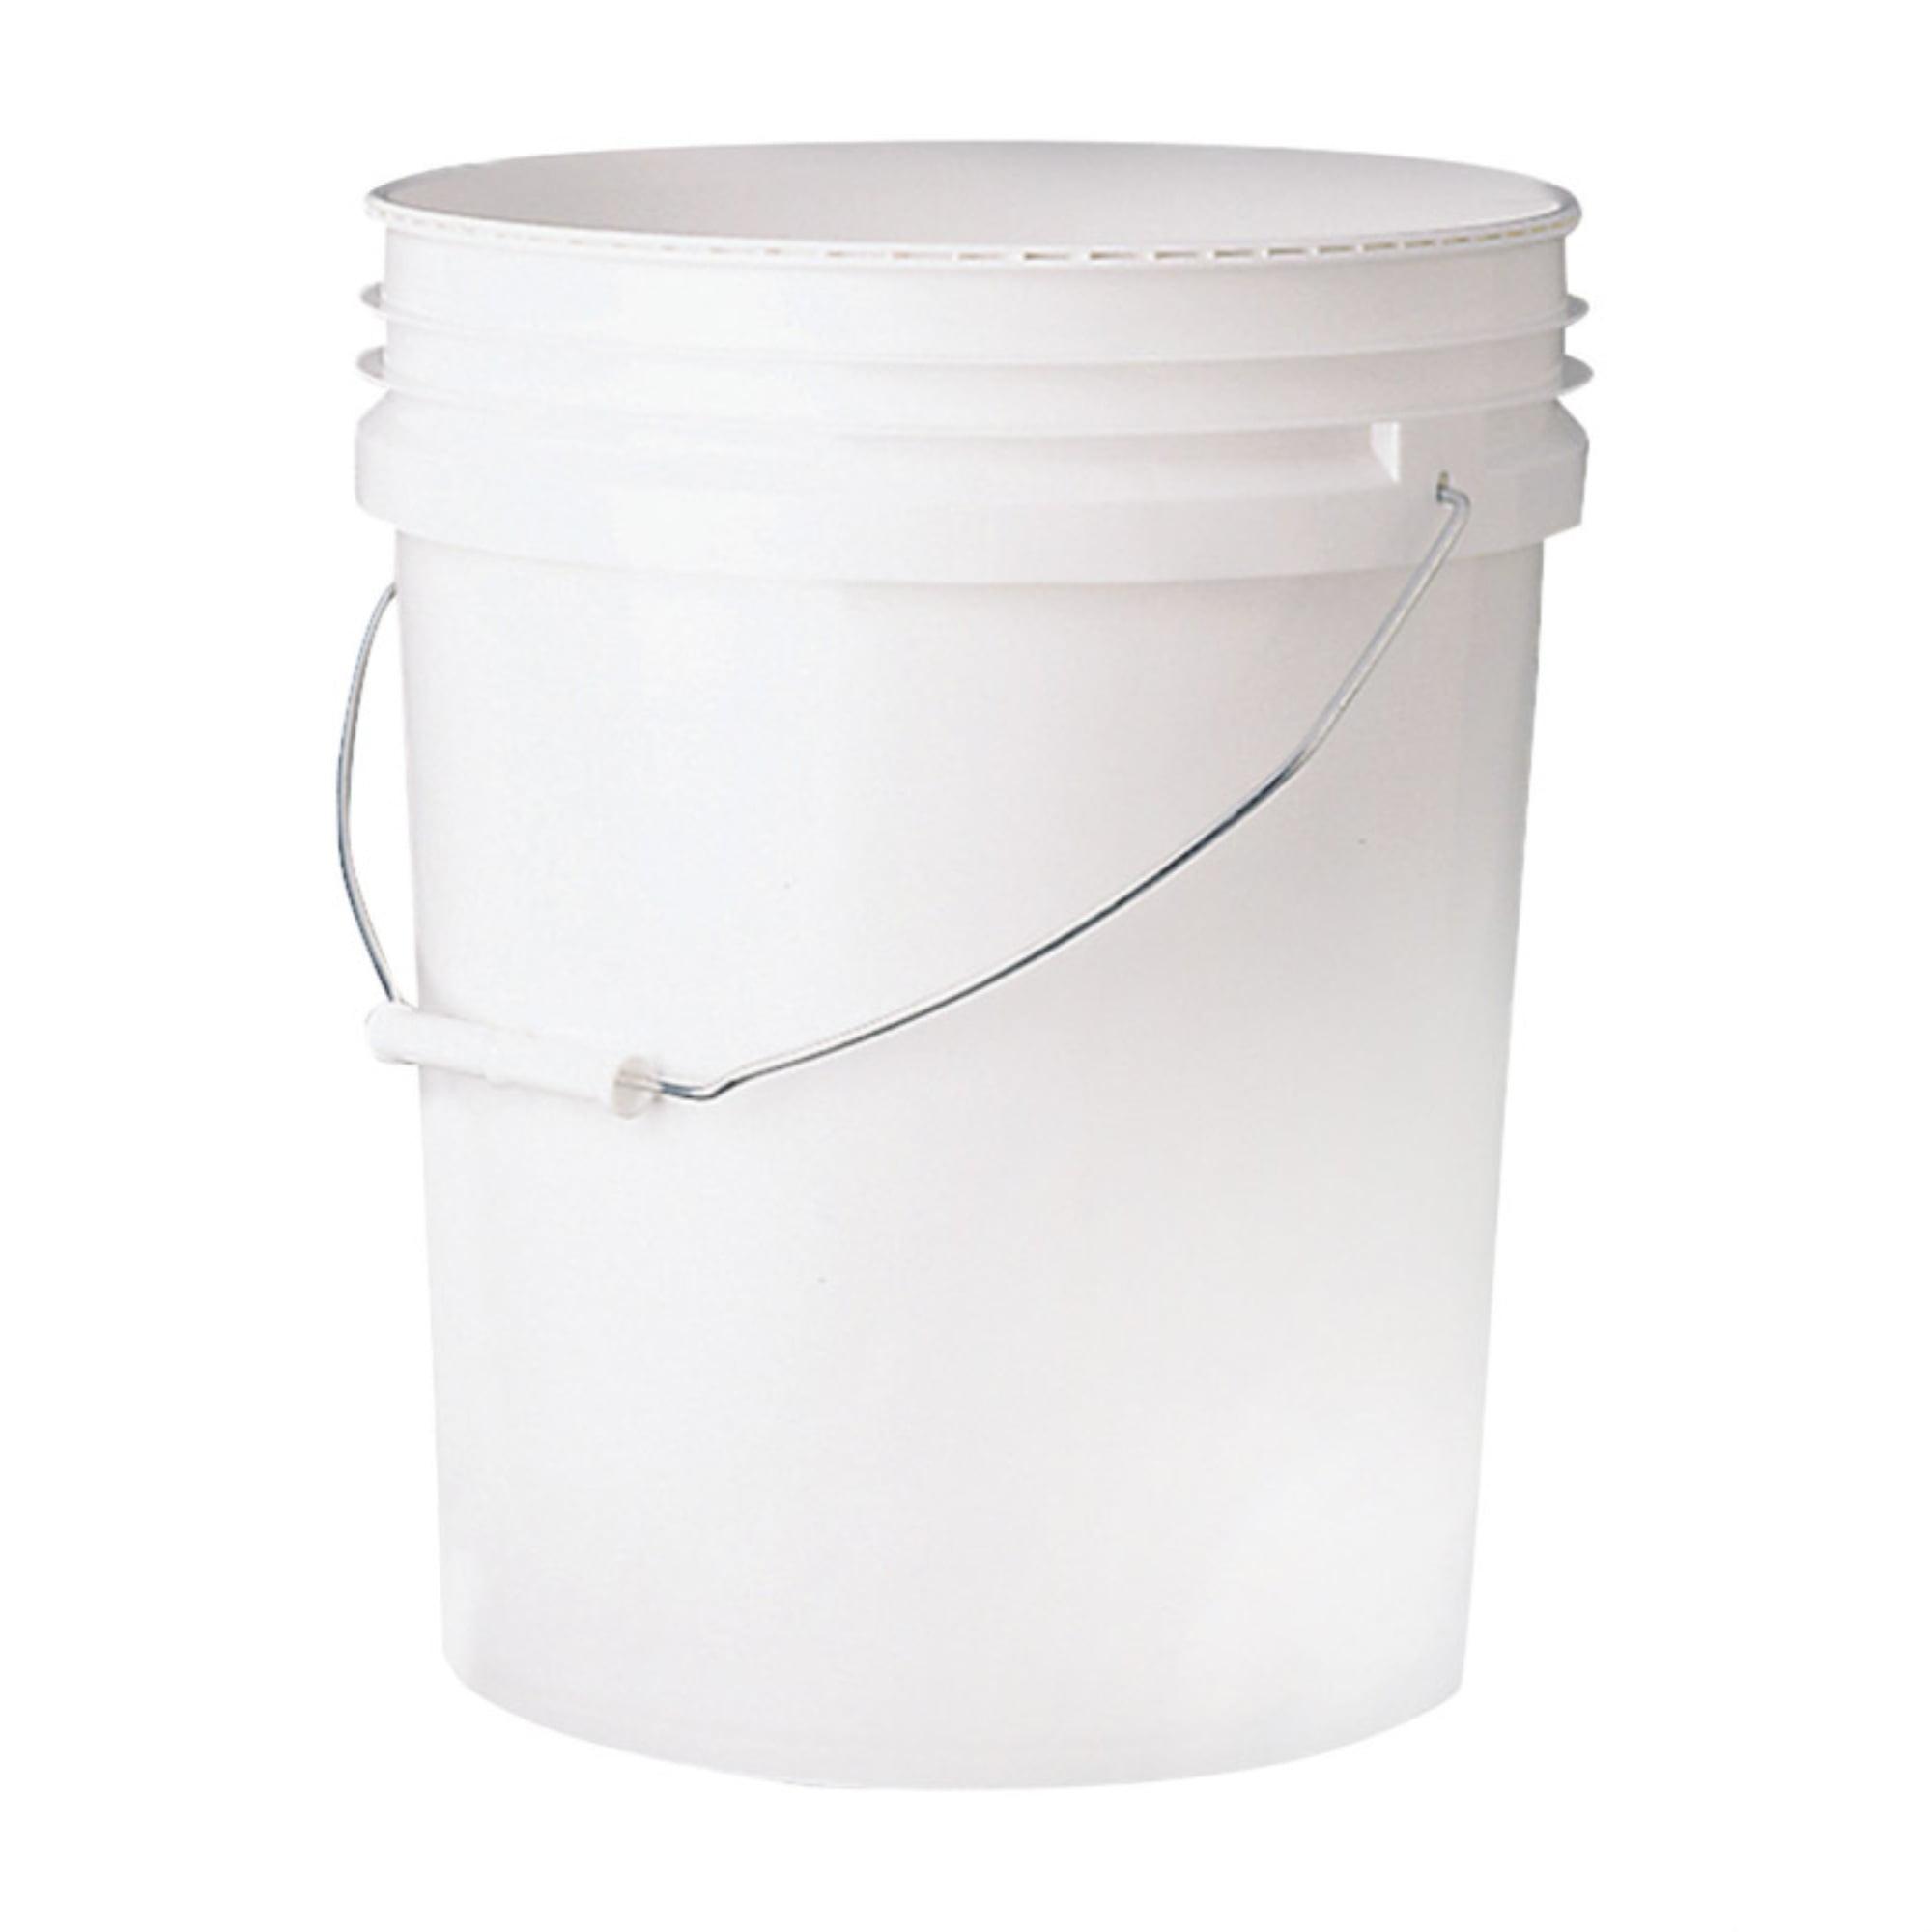 United States Plastic Buckets Tight Fitting Lids Storage 4 Gallon Pack of 10